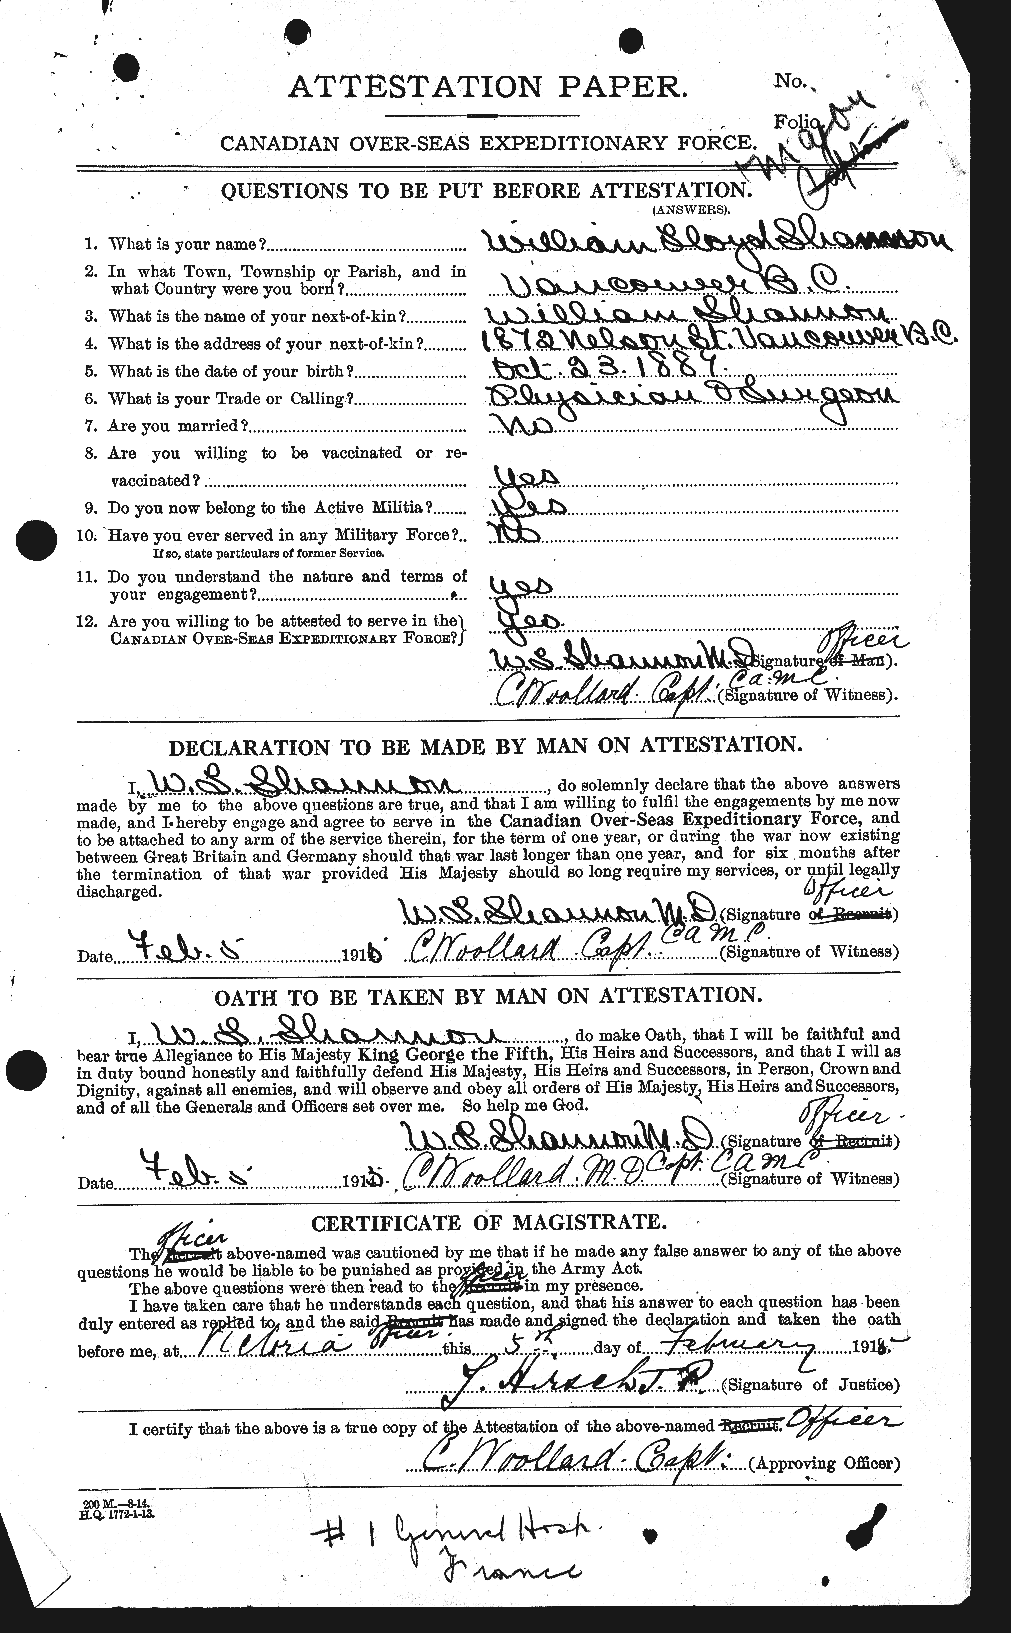 Personnel Records of the First World War - CEF 088115a